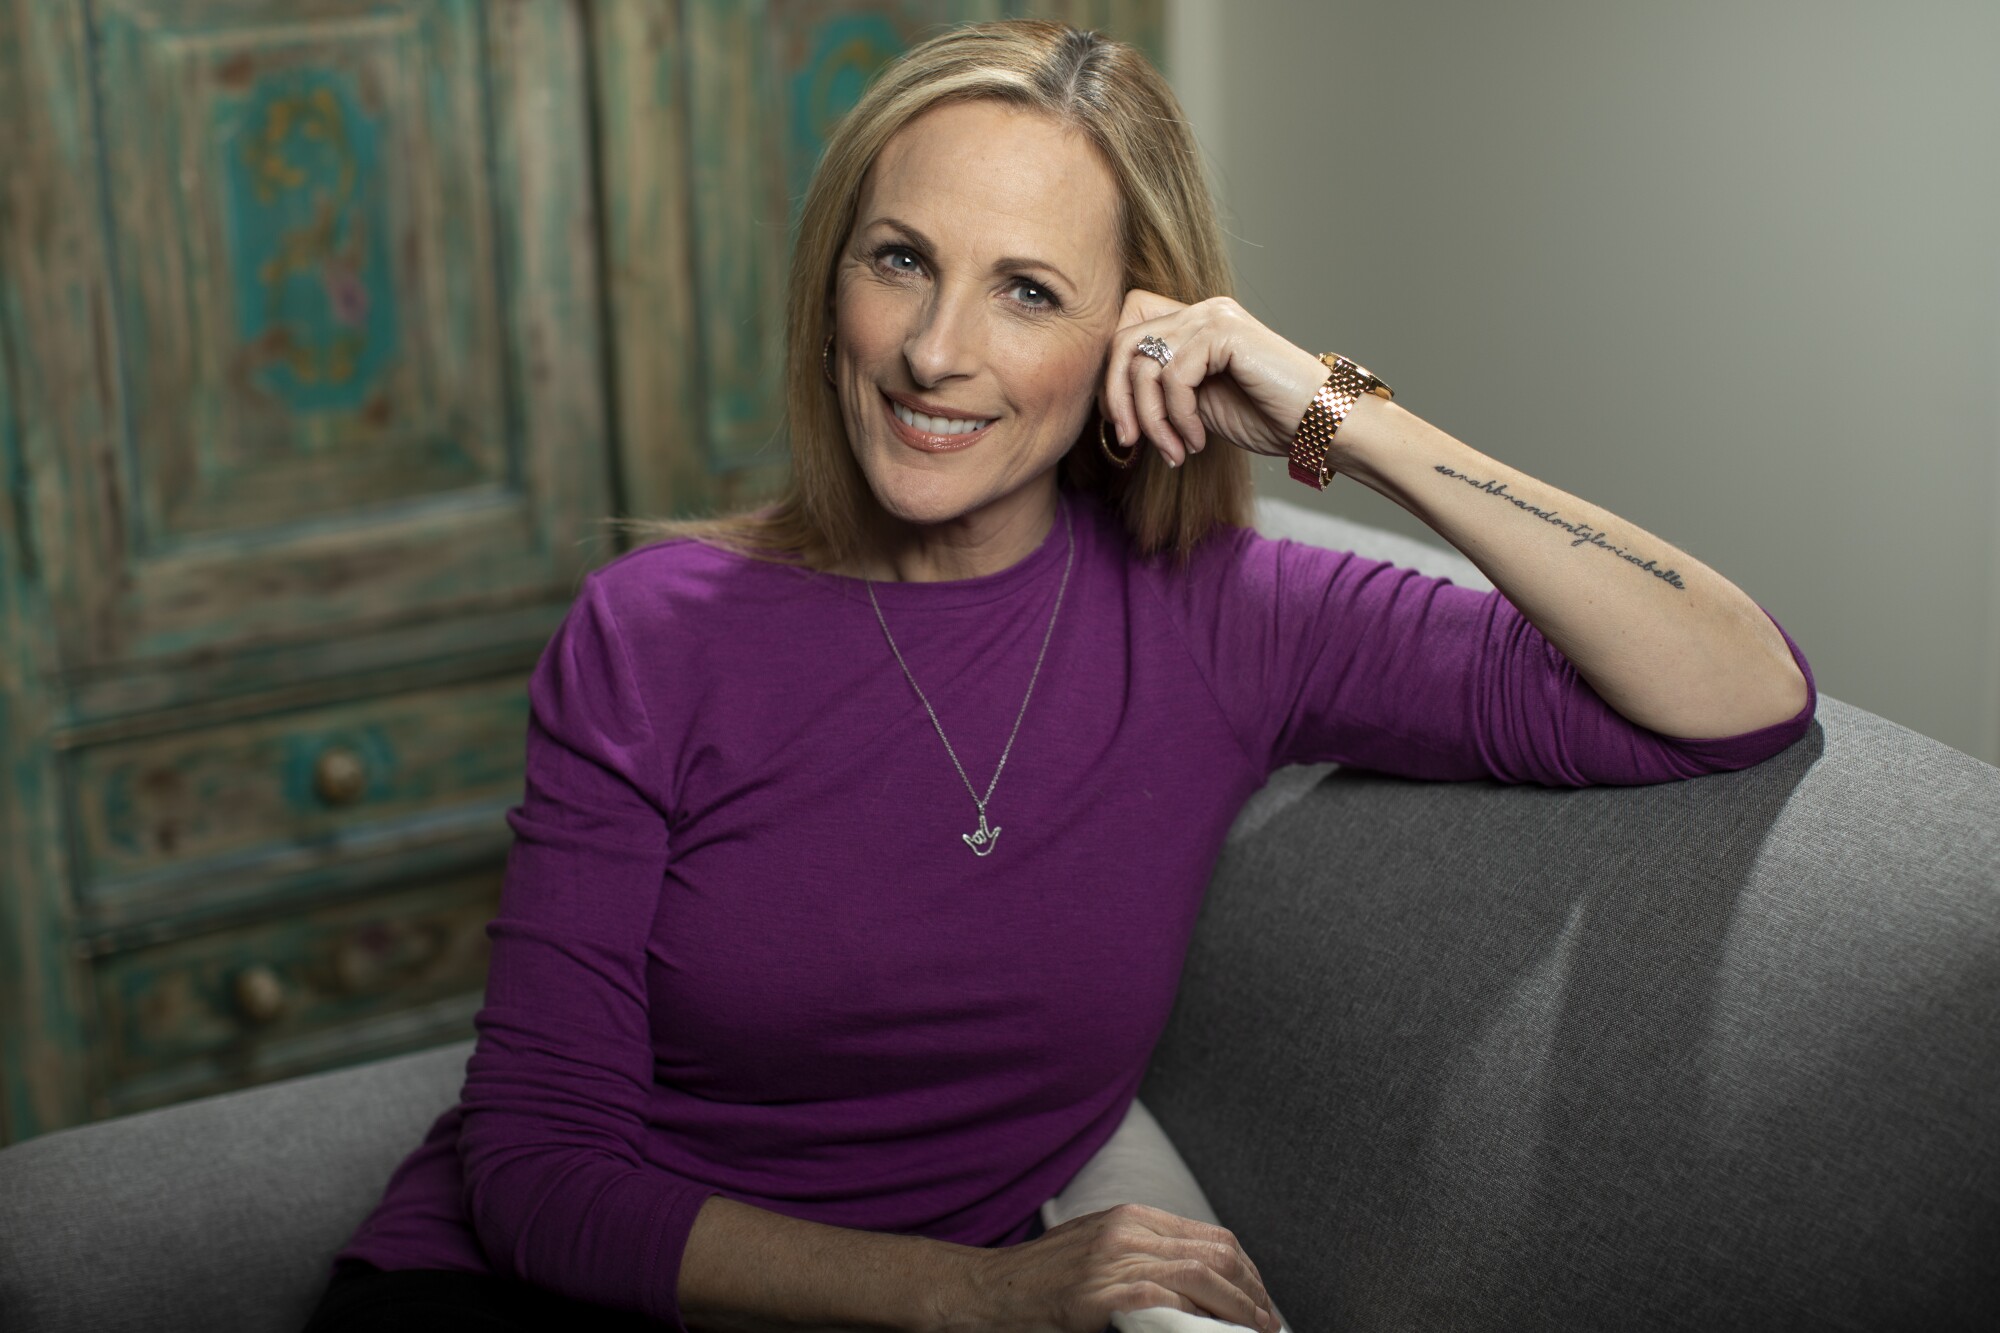 Actress Marlee Matlin stars in "CODA," which premieres at the Sundance Film Festival.